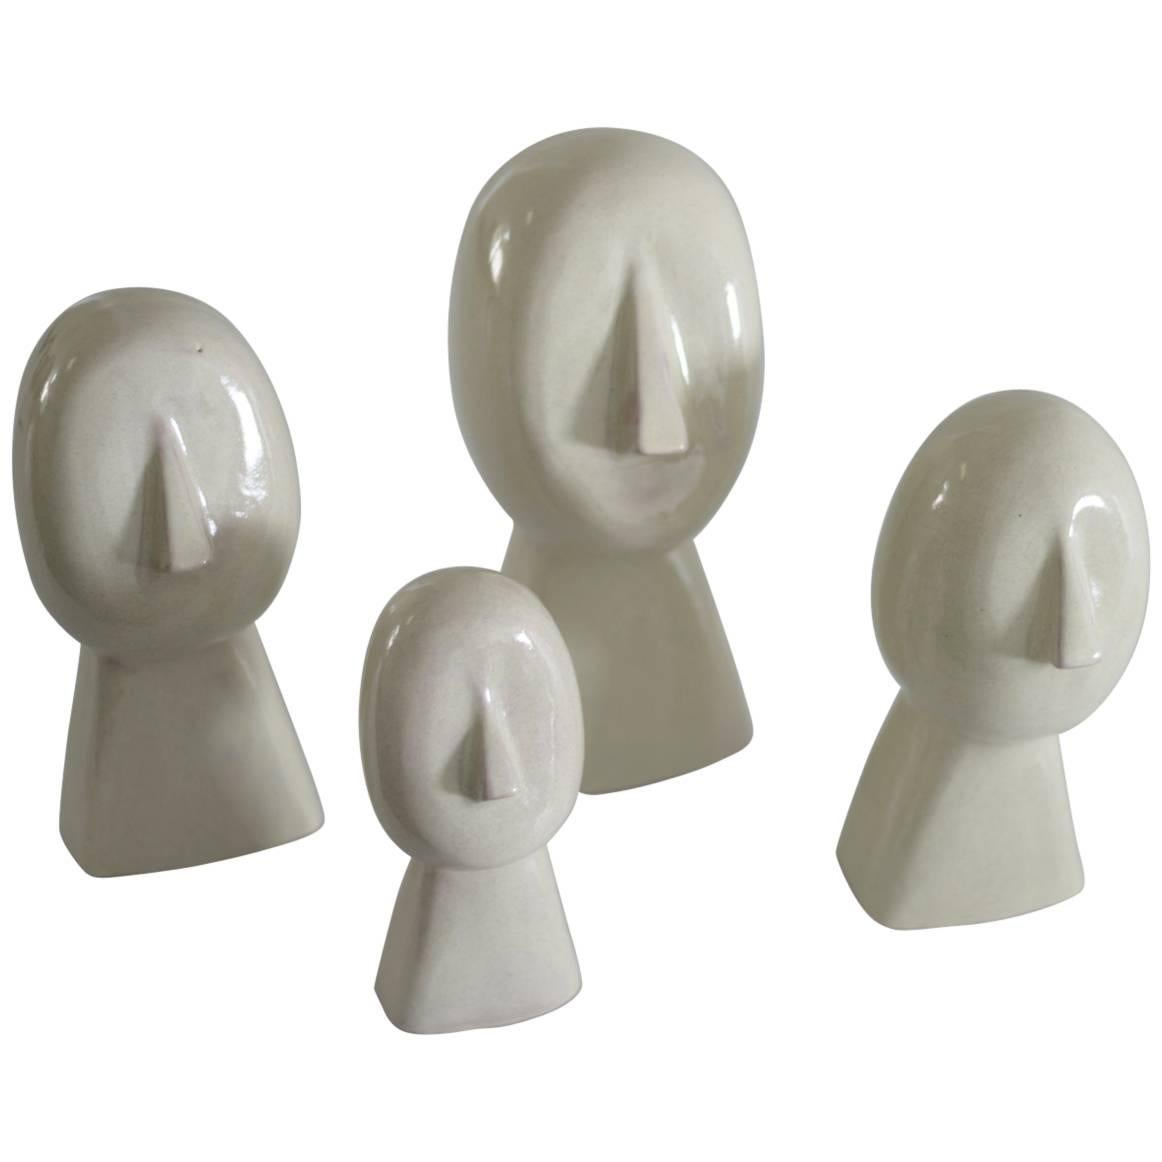 White Human Sculptures of Talavera “The Family” by Gerardo Chapital For Sale